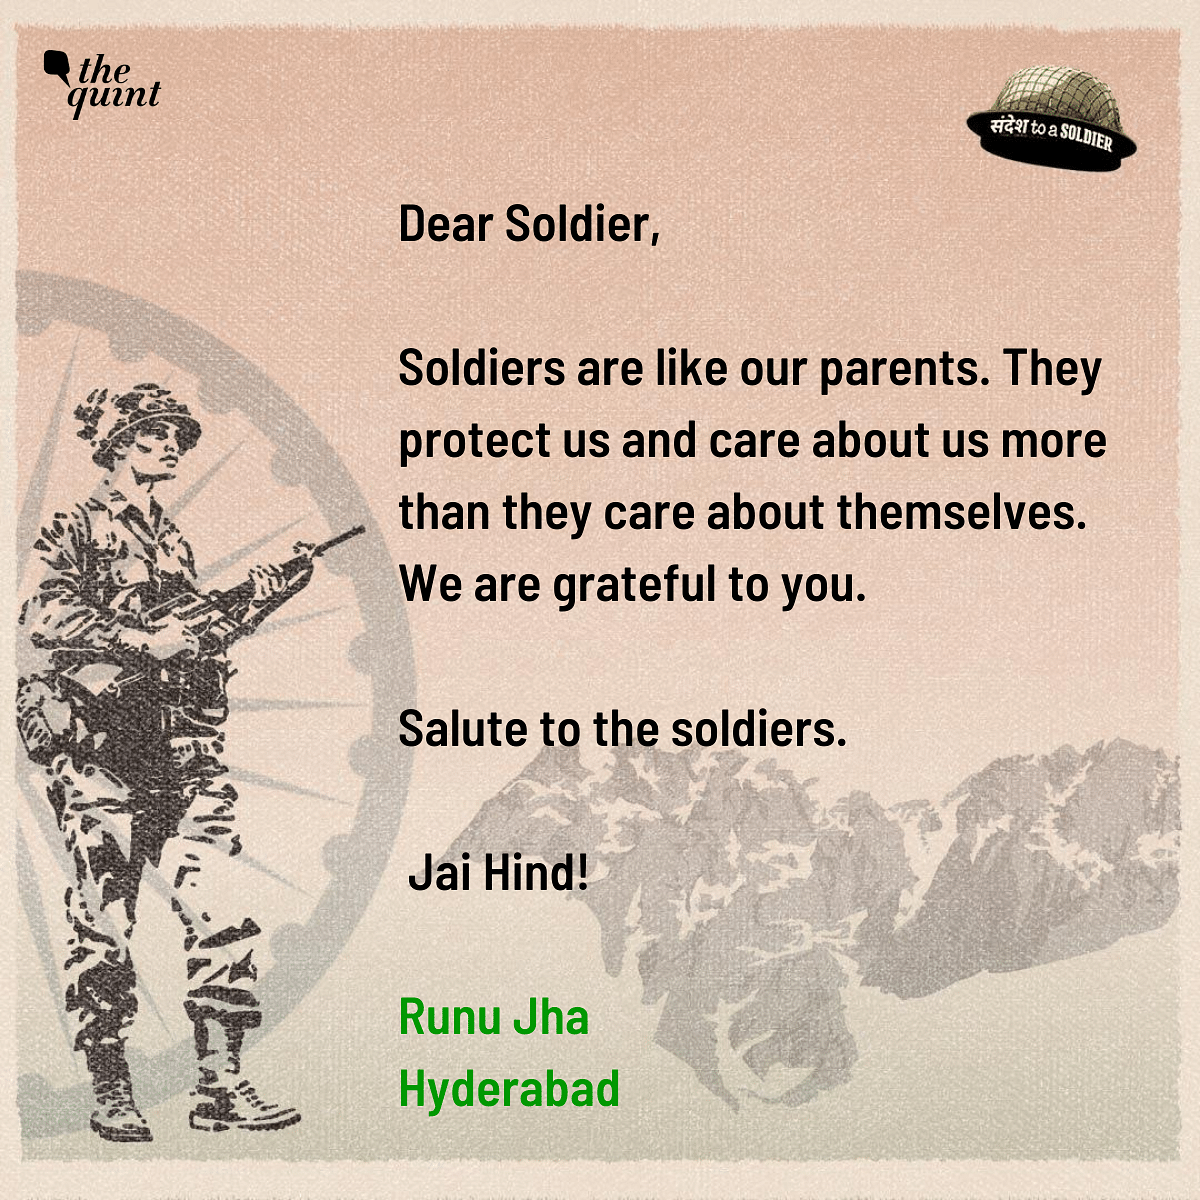 Souraja from West Bengal, pens down how for soldiers whom they have never met, she prays to God to protect them.